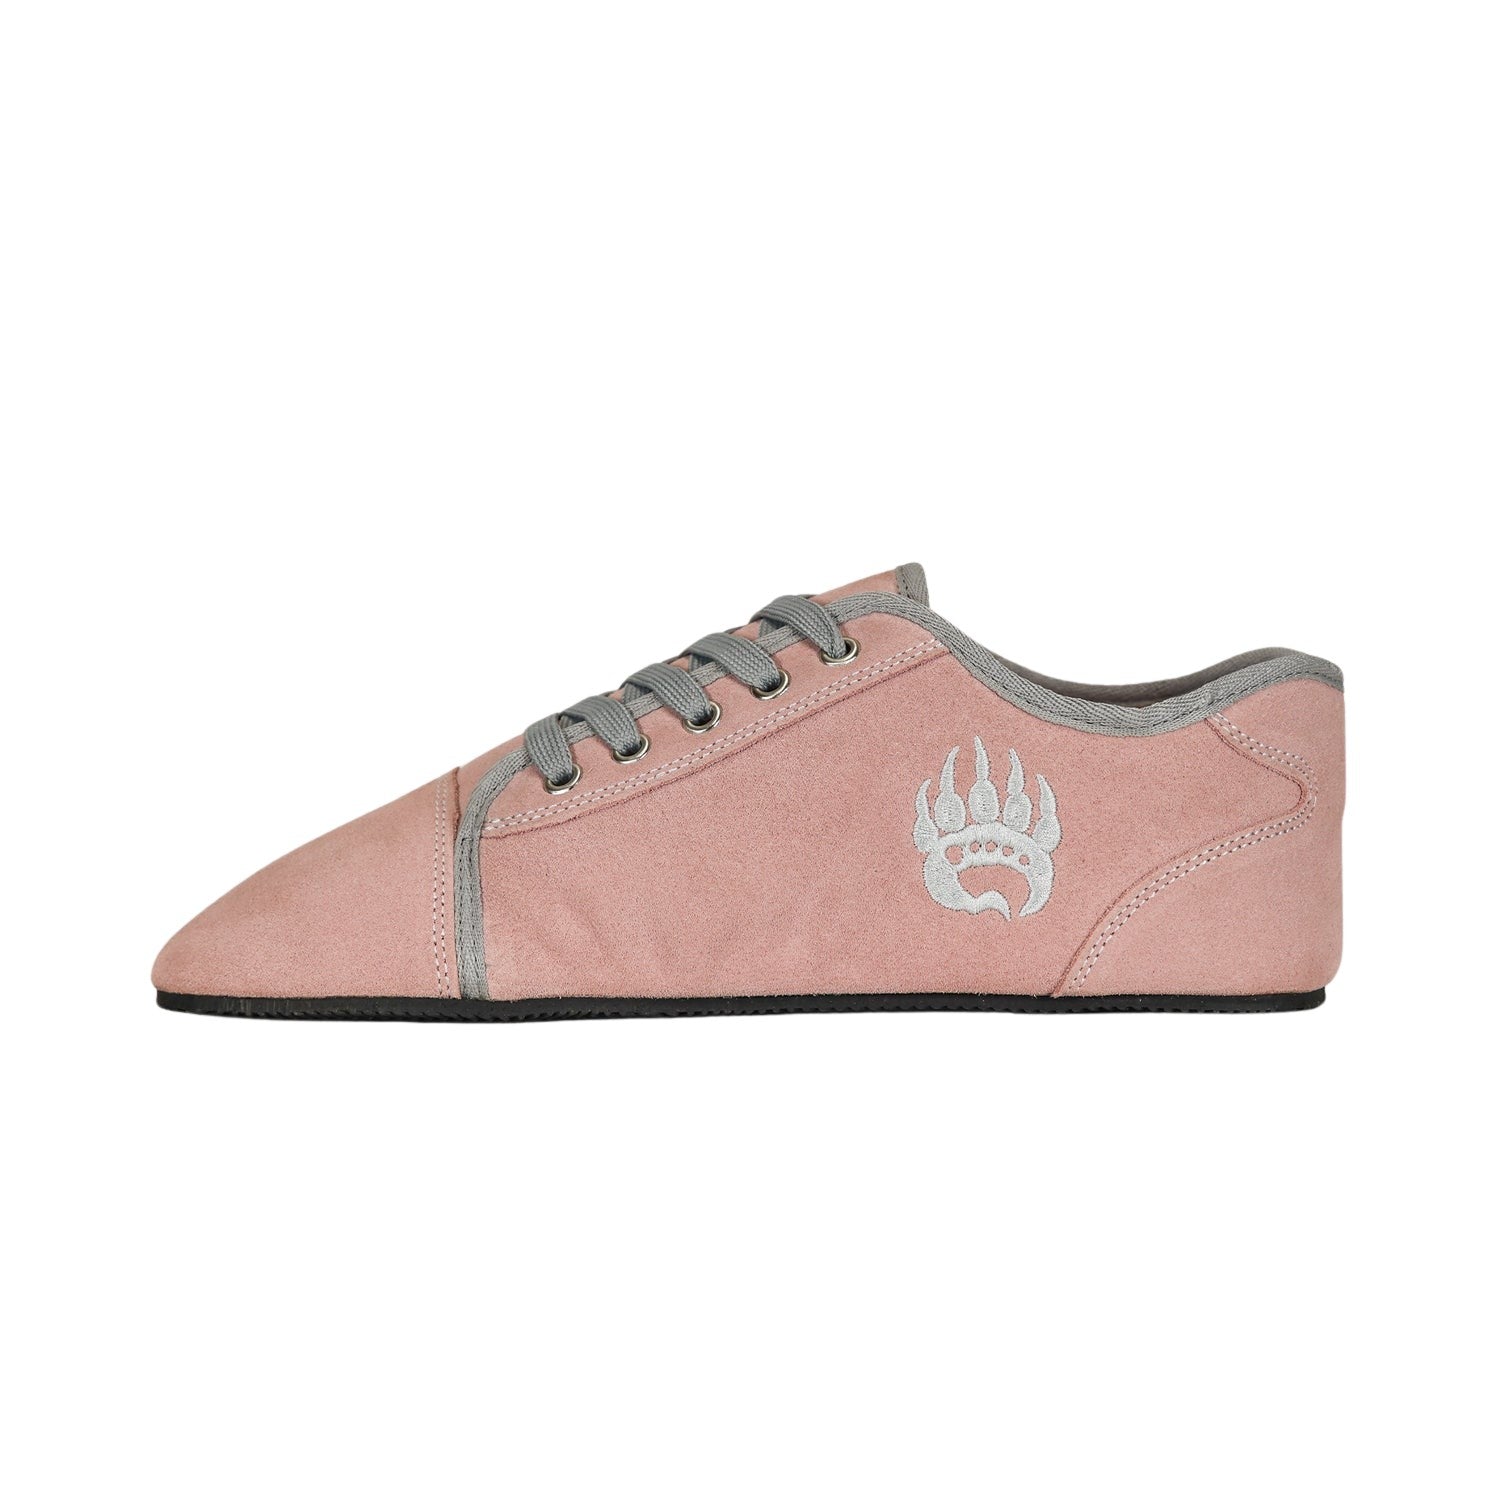 A Ursus Suede low-top training sneaker in King Salmon with grey accents and a white Bearfoot logo on the side.